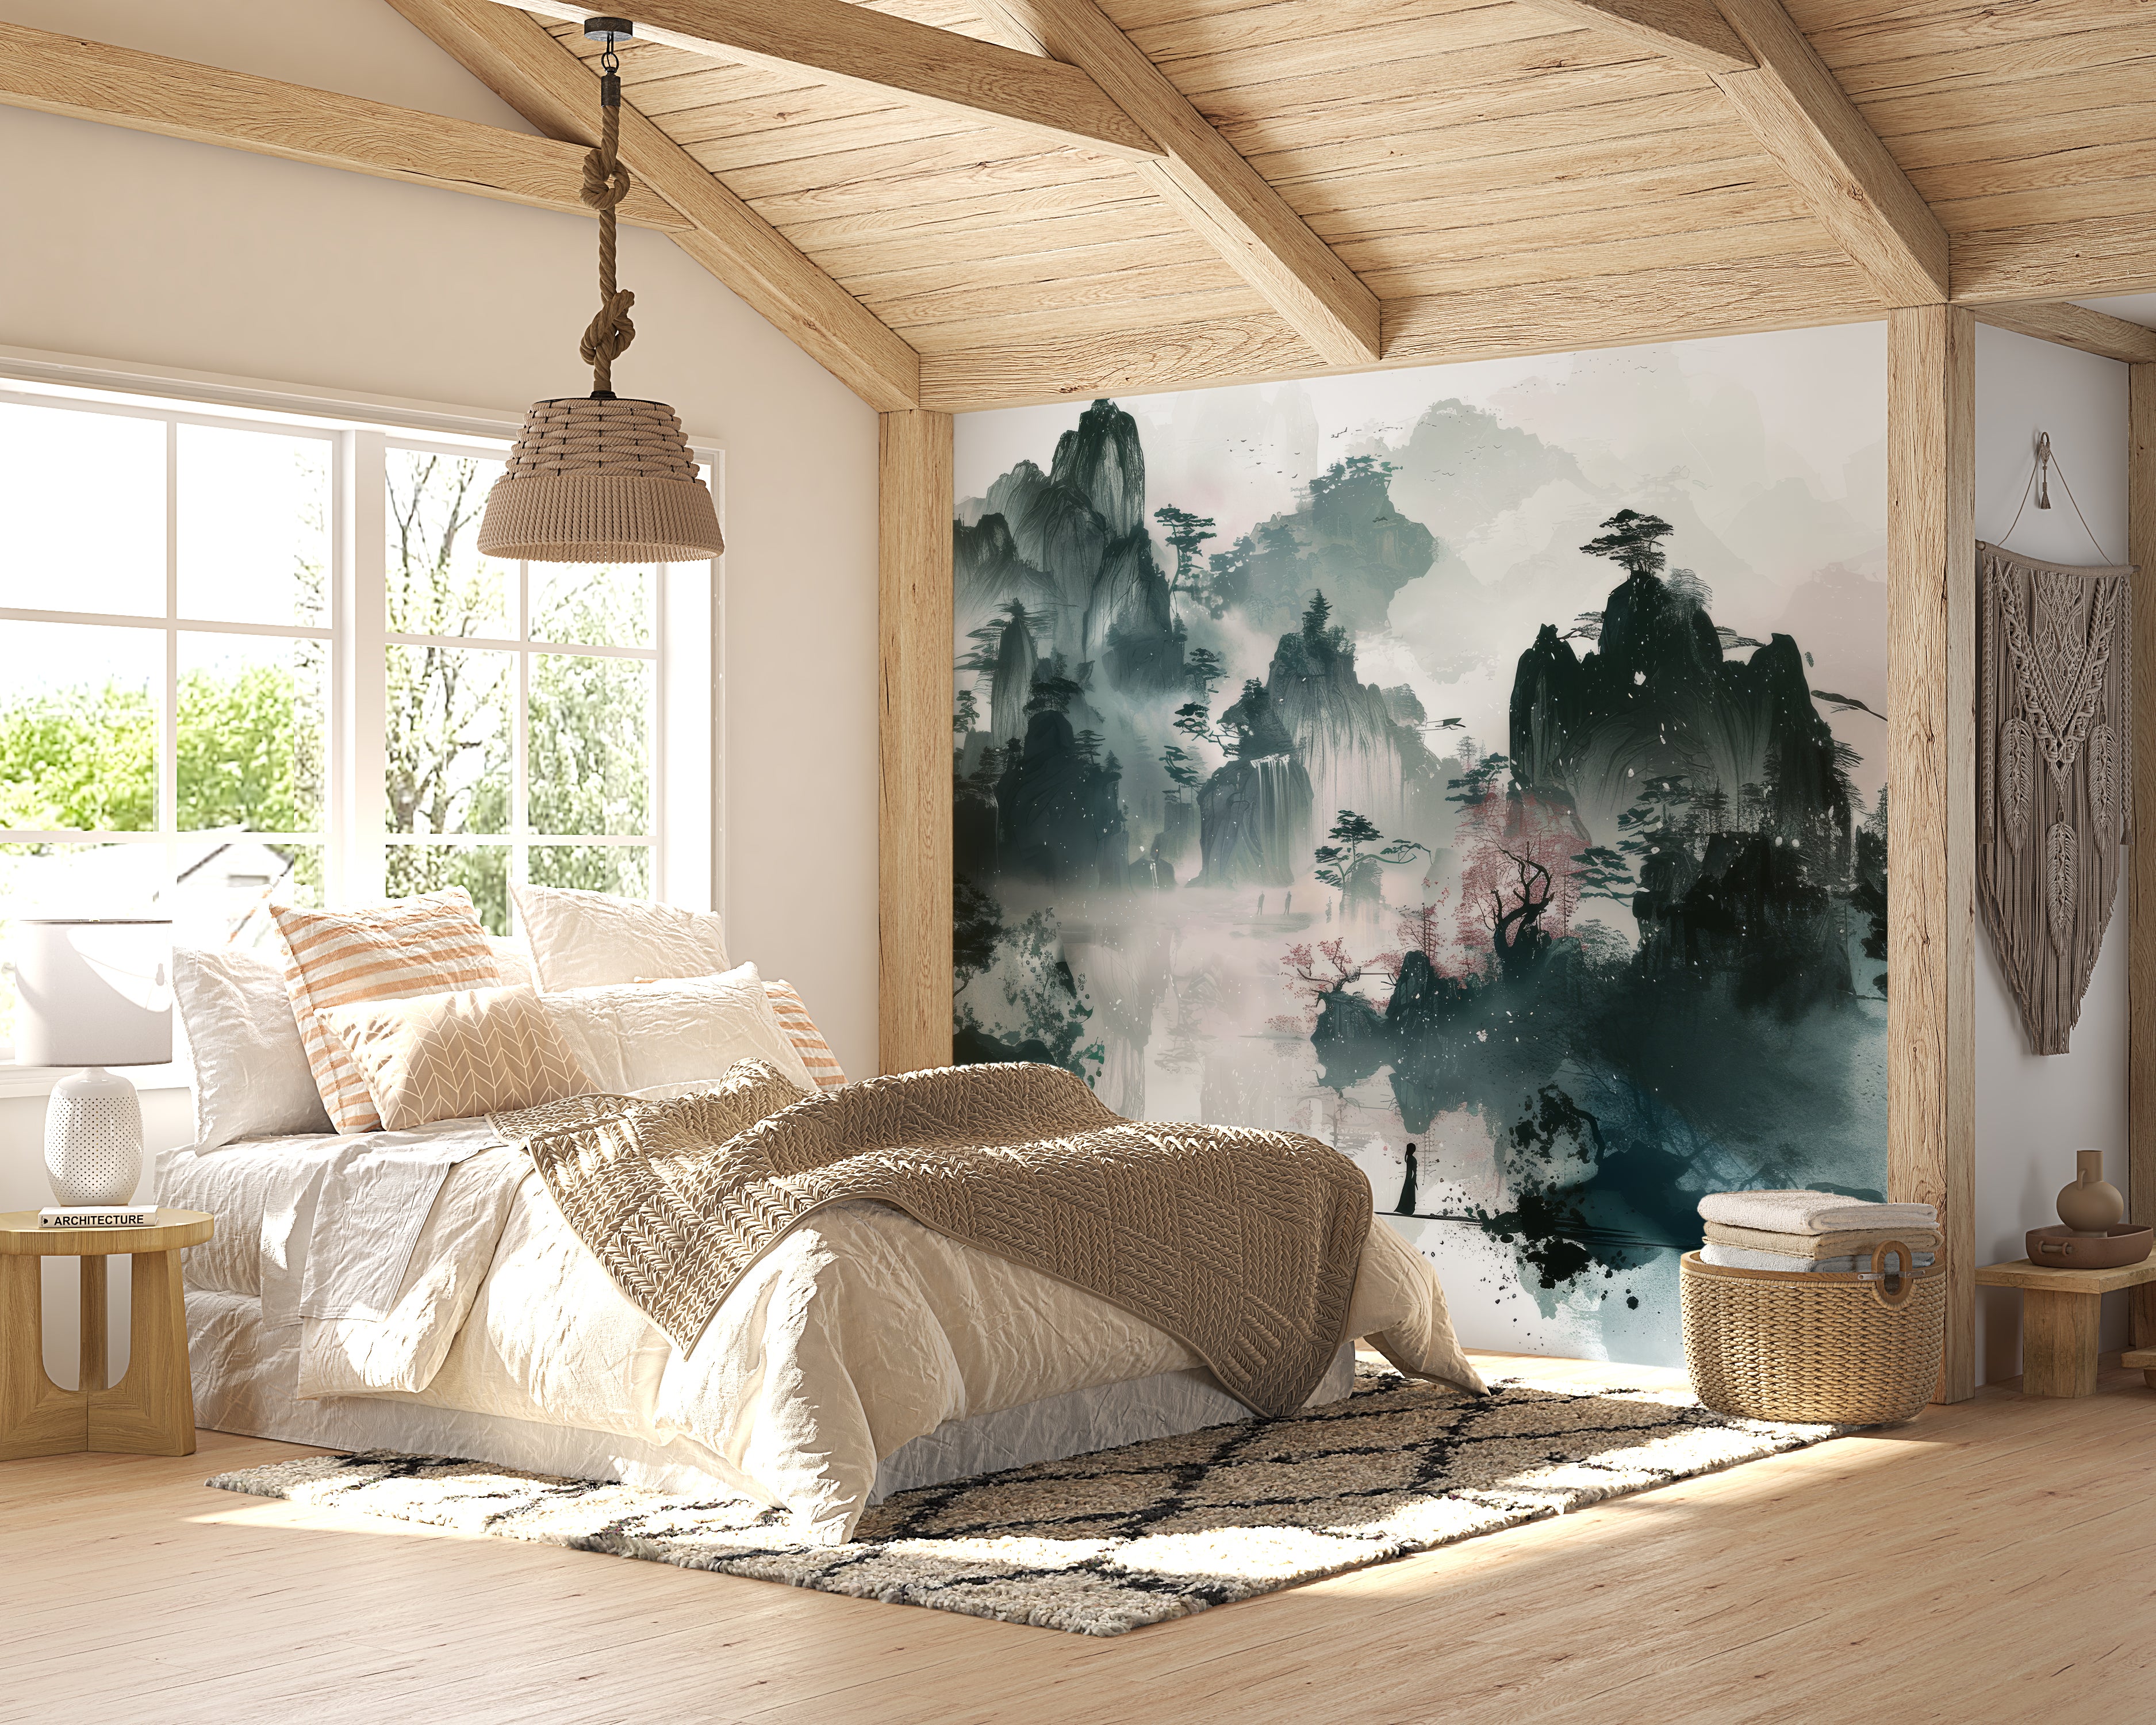 Dream of Asia: Wall Covering Inspired by Traditional Paintings